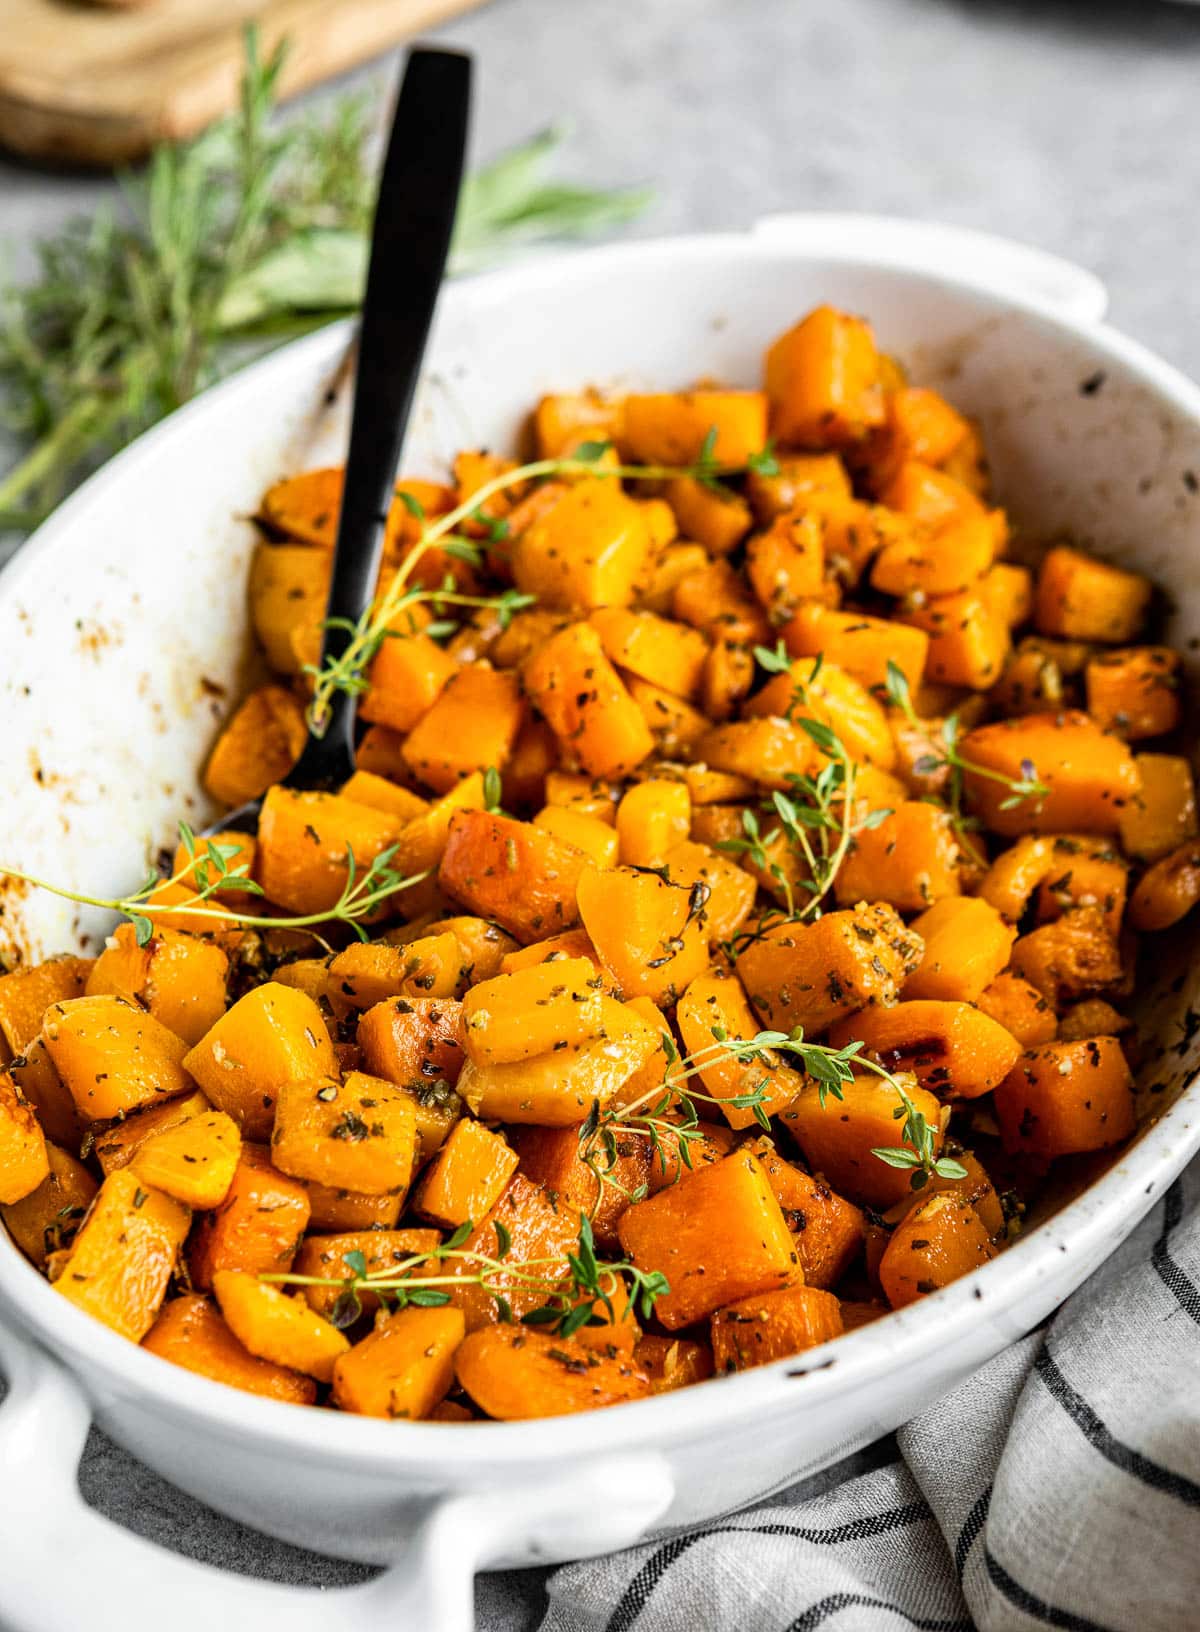 baking dish full of roasted cubed butternut squash baked with fresh herbs.